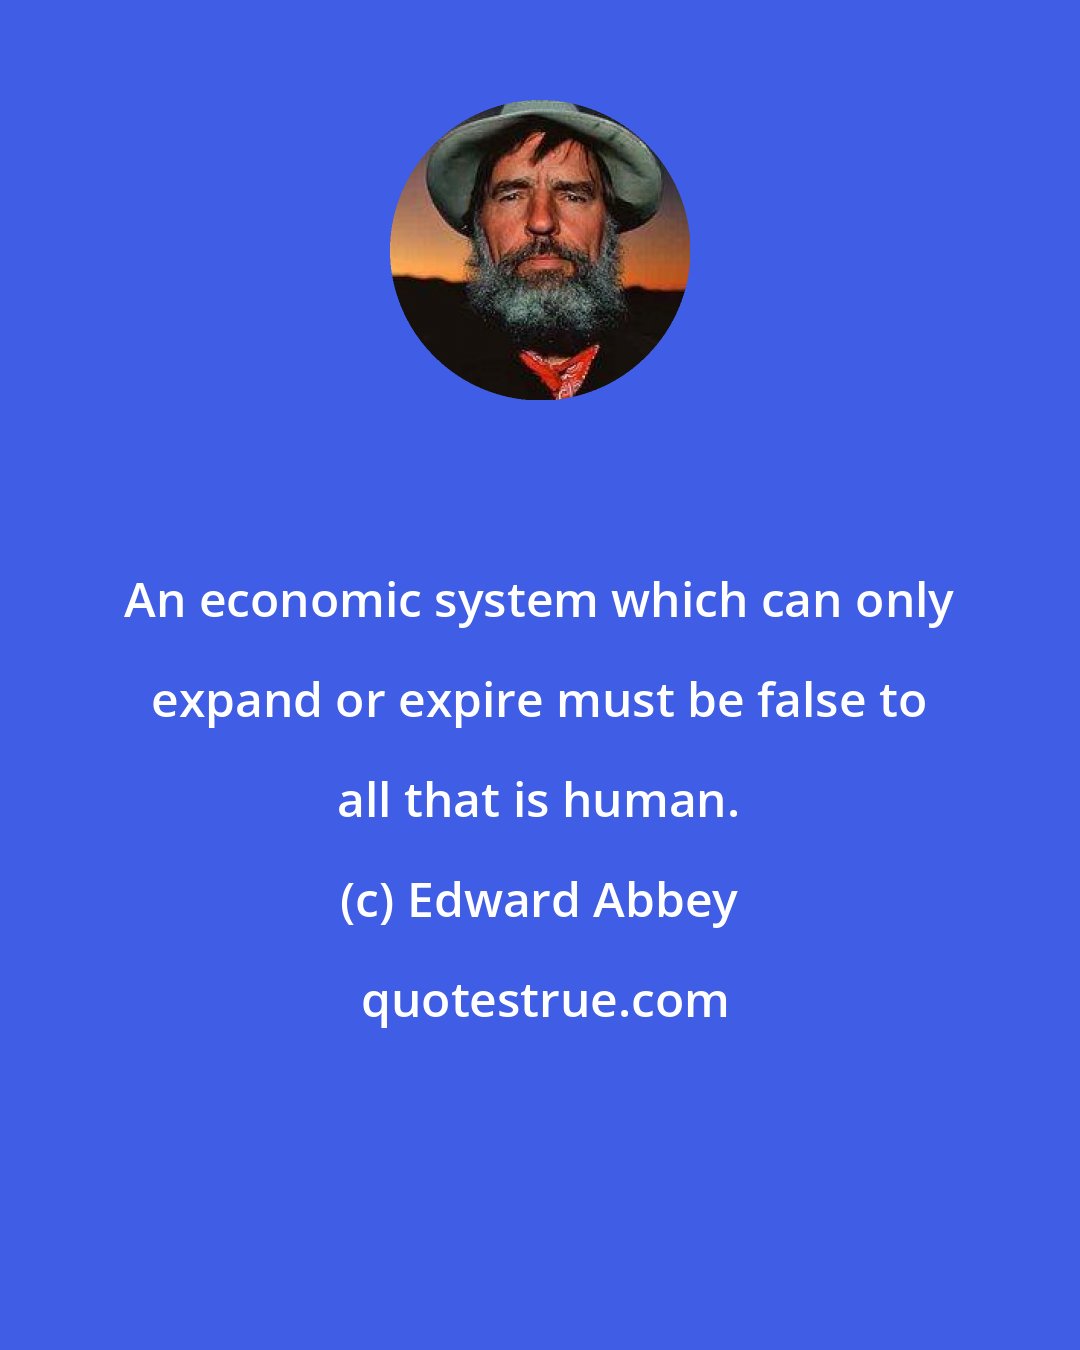 Edward Abbey: An economic system which can only expand or expire must be false to all that is human.